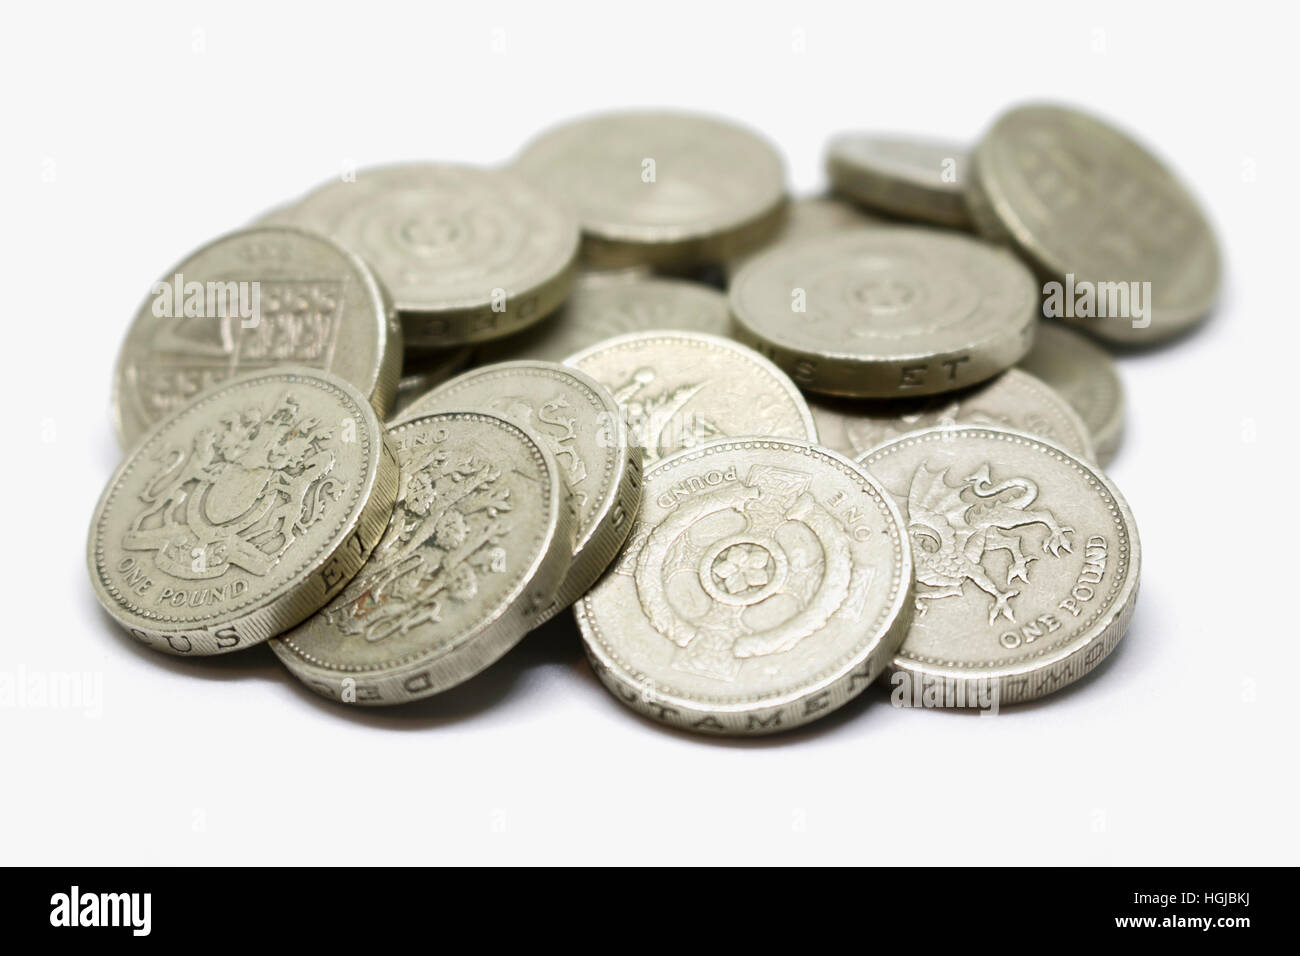 Pile of British 1 pound coins in a pile on an isolated white background Stock Photo